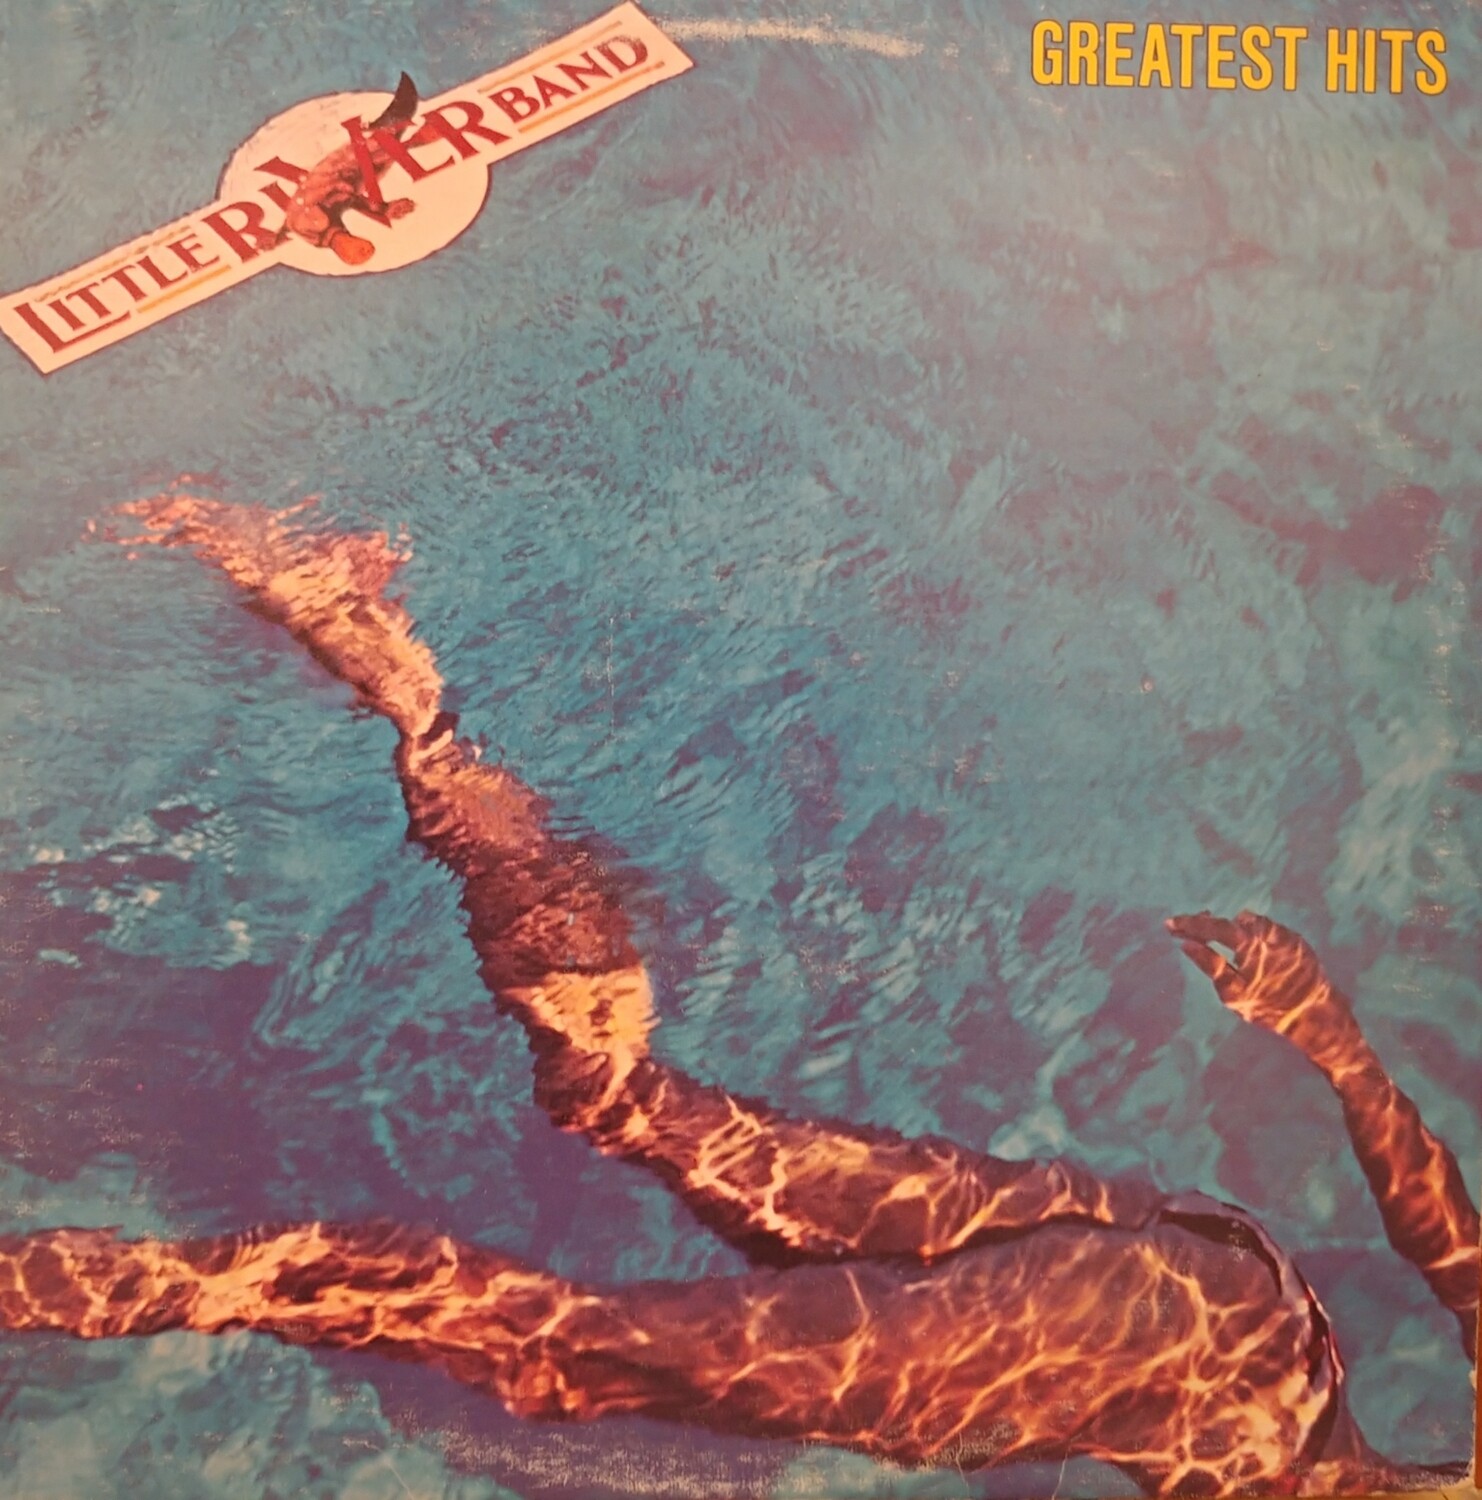 Little River Band's - Greatest Hits